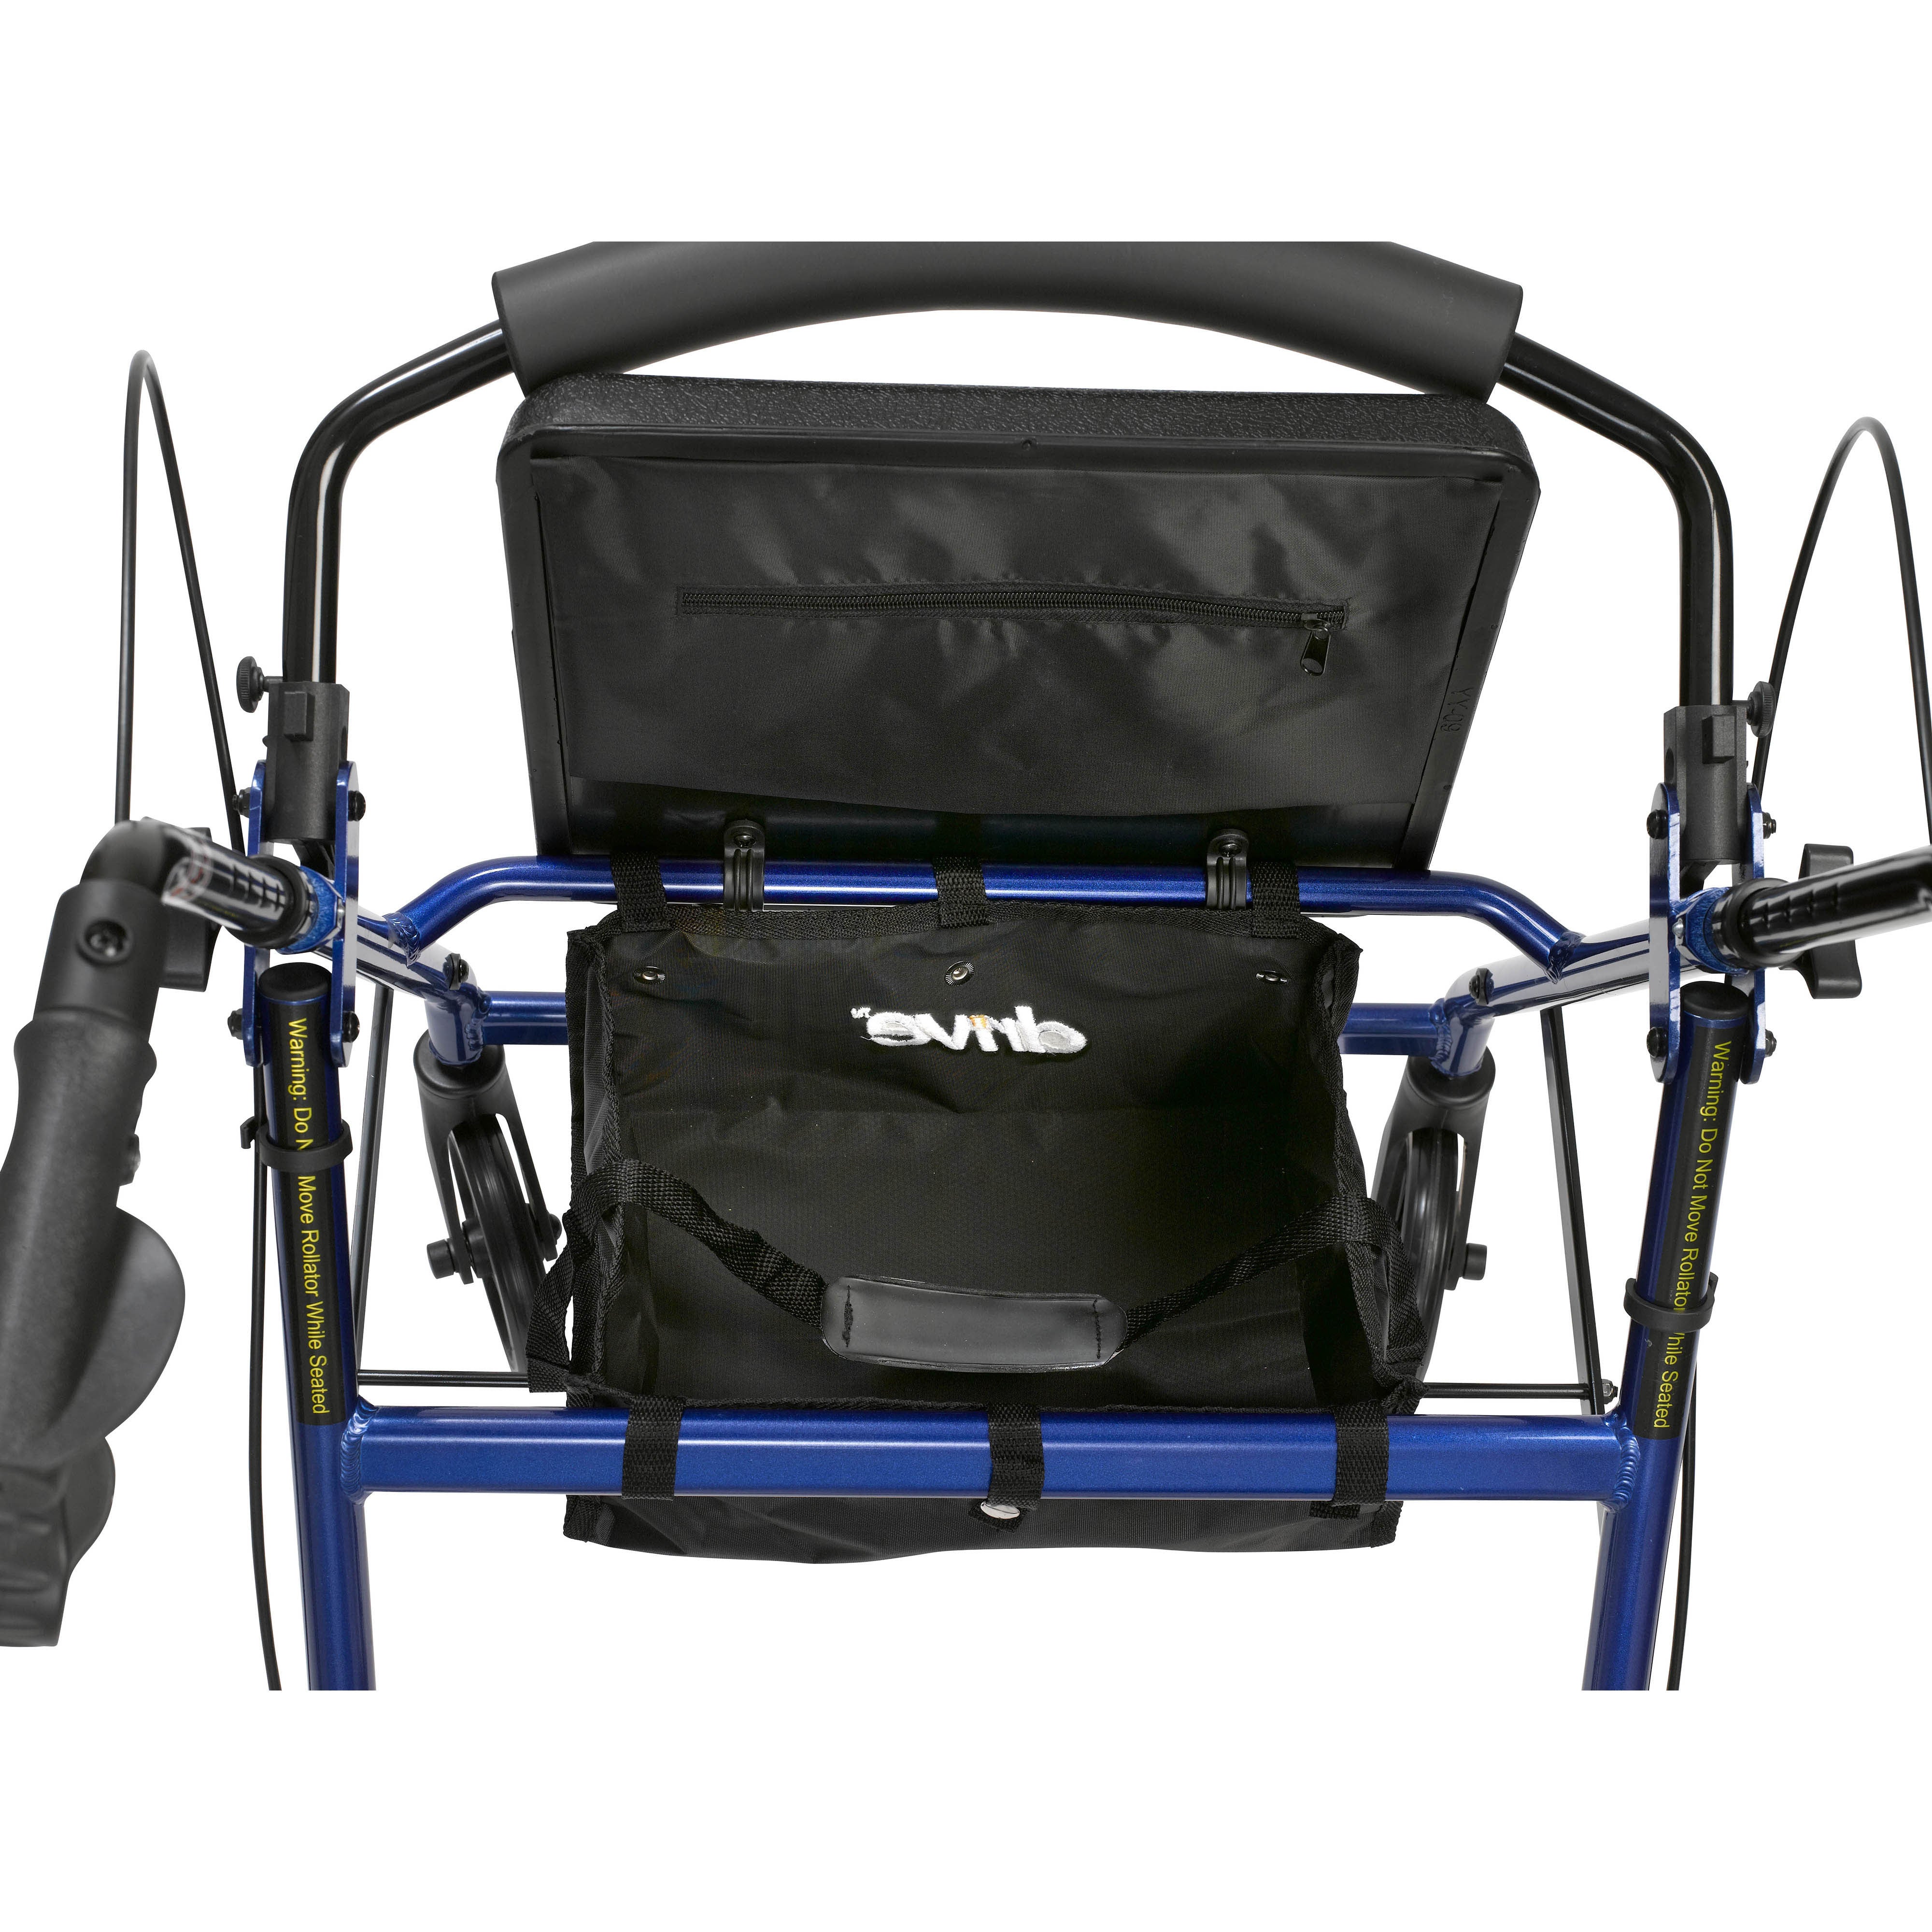 Rollator 4-Wheel with Pouch & Padded Seat Blue - Drive - Precision Lab Works